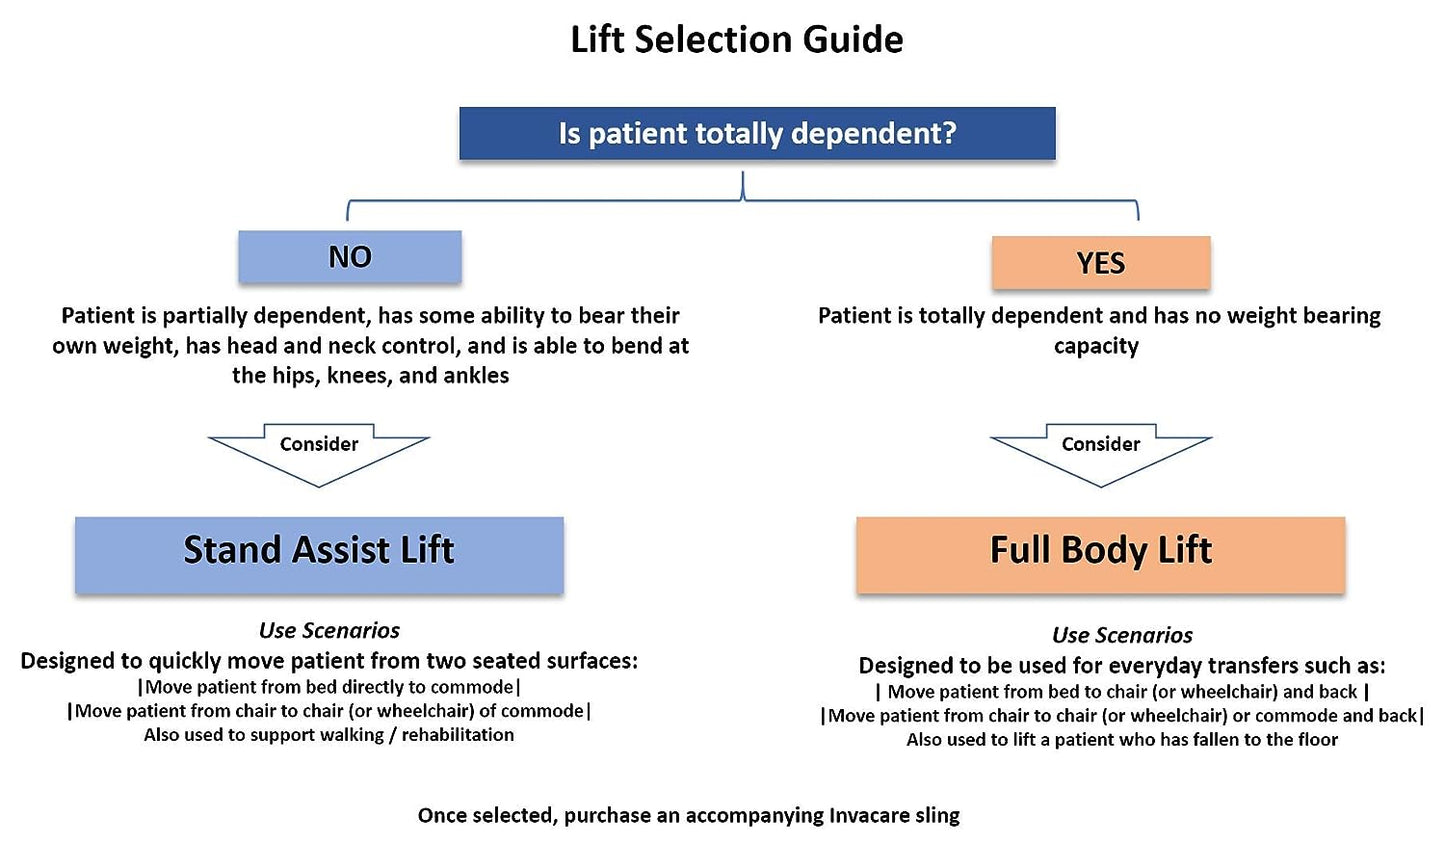 An informational sheet providing information to help choose the appropriate lift between a stand assist lift or a full body lift.